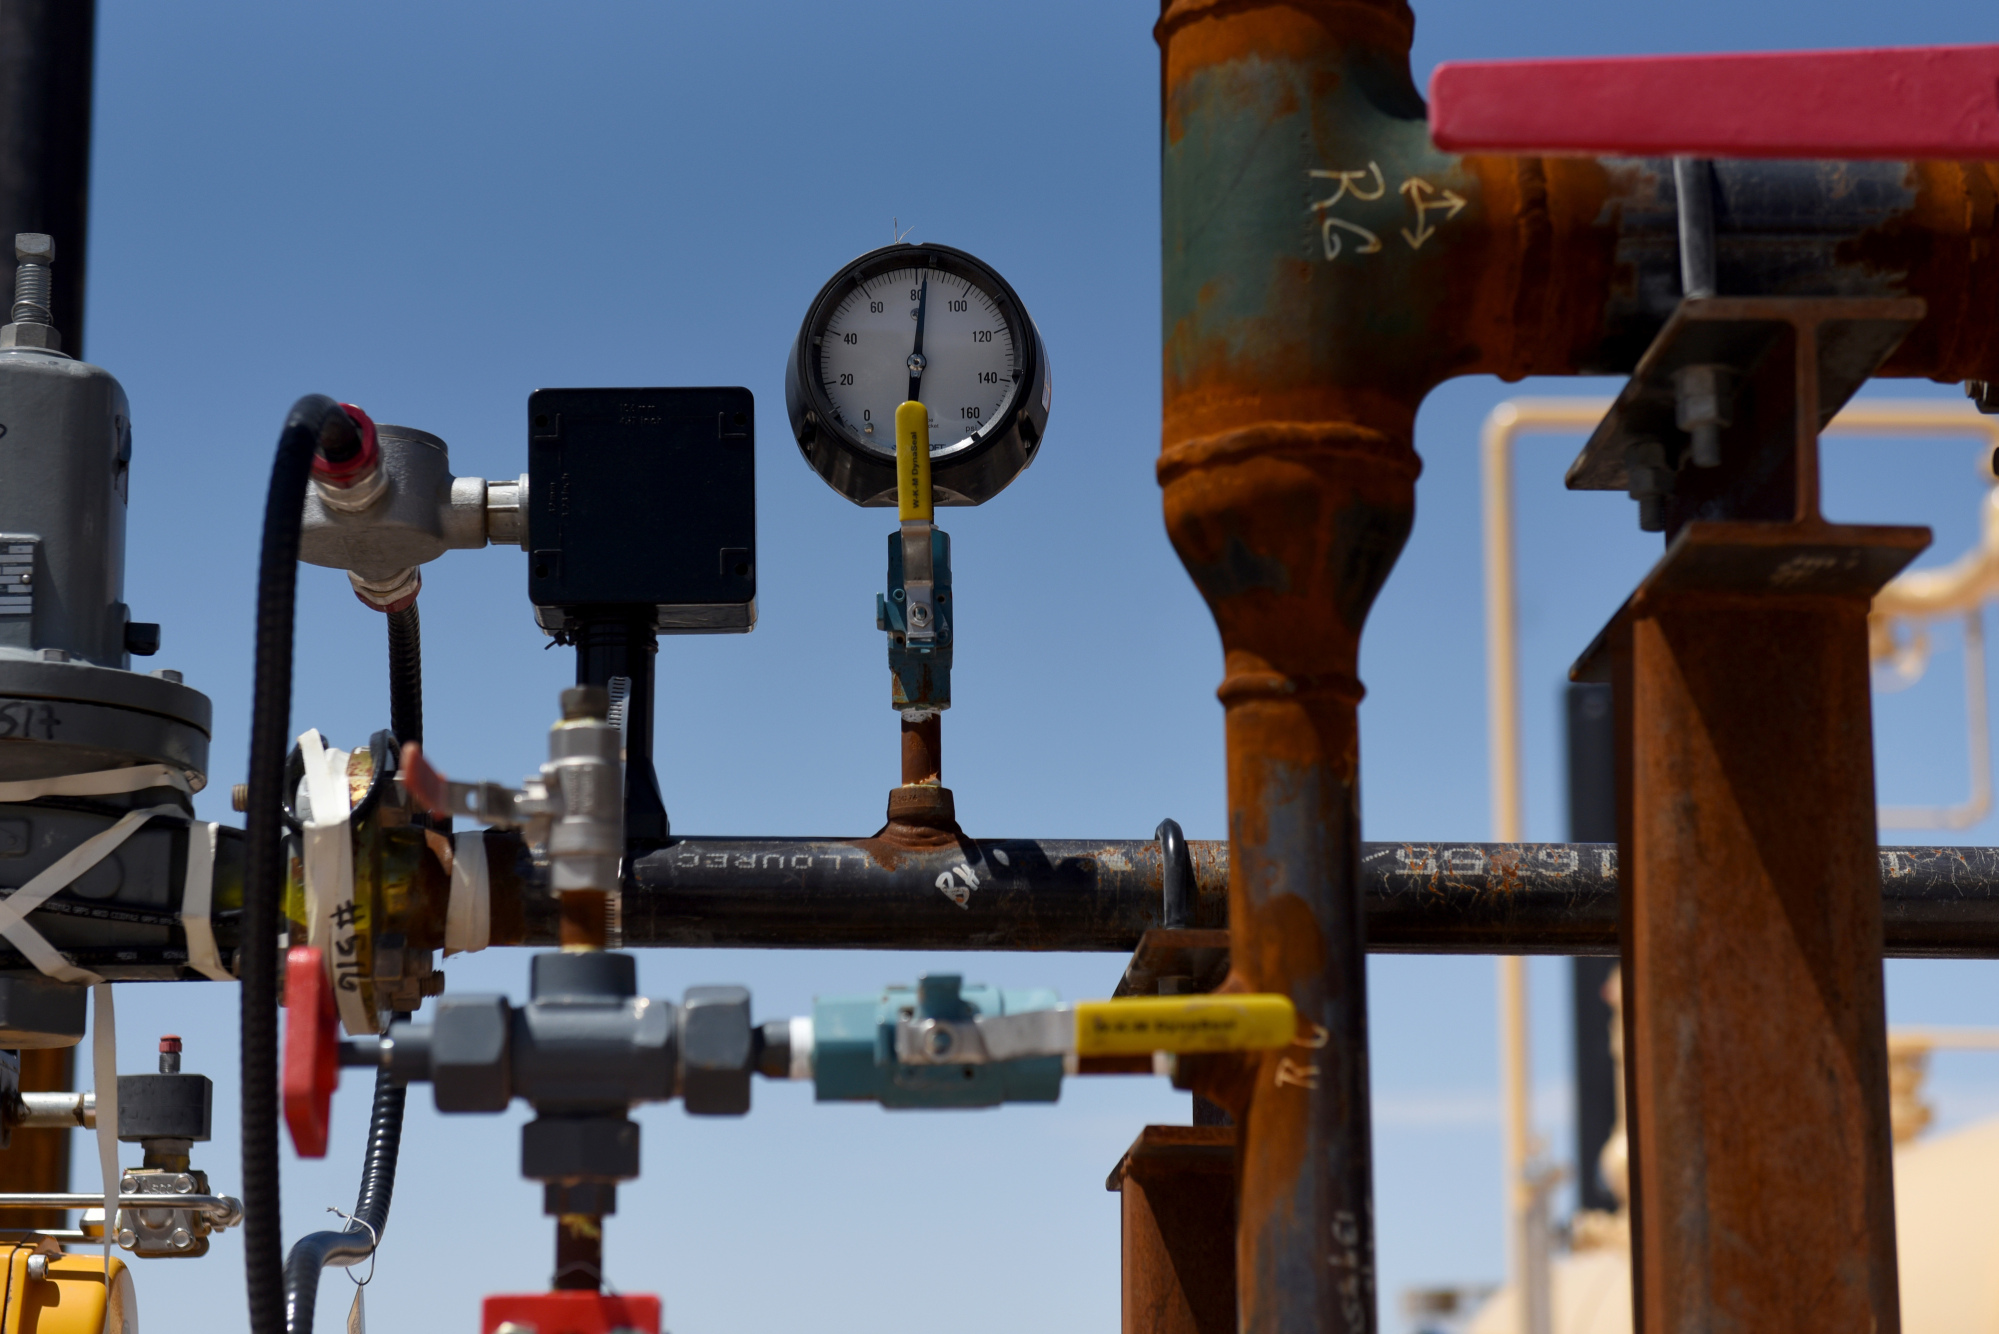 A gas valve sits on a pipeline at the Royal Dutch Shell Plc processing facility in Loving, Texas, U.S., on Friday, Aug. 24, 2018. Royal Dutch Shell Plc came through a quarter of volatile oil prices to beat earnings estimates, delivering a surge in cash flow the company said will underpin "world-class" returns to investors. Photographer: Callaghan O'Hare/Bloomberg